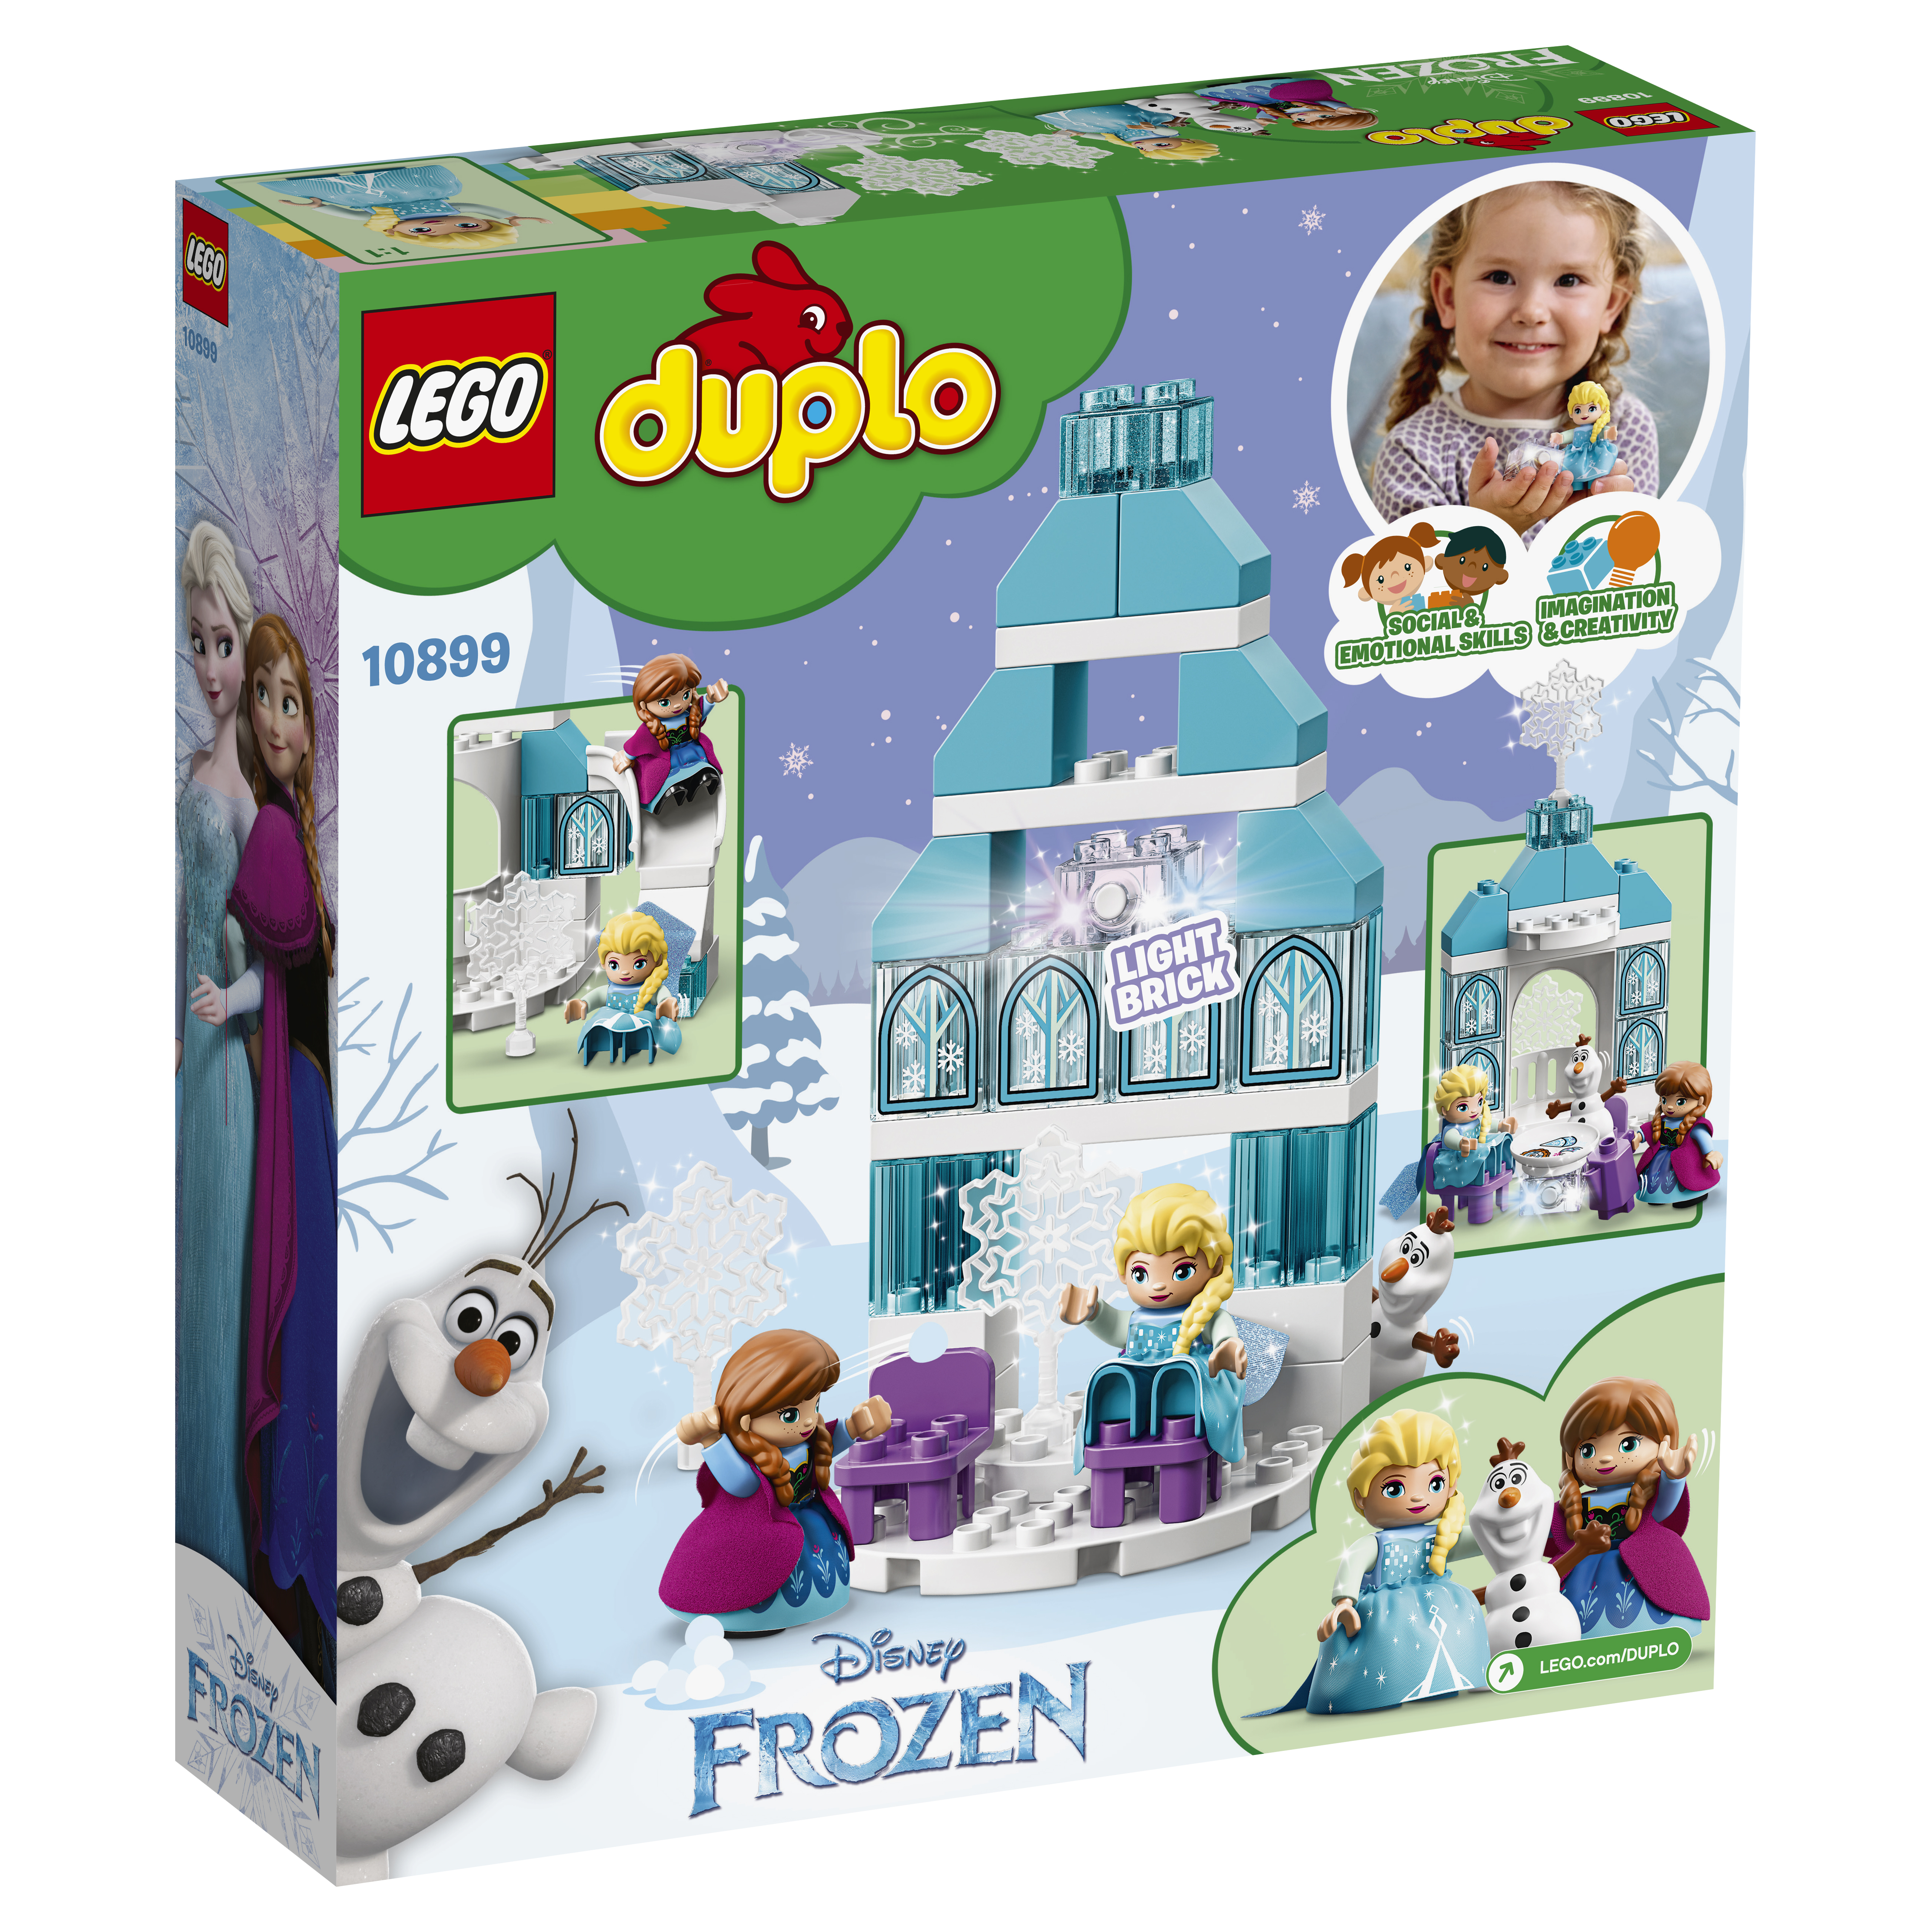  Duplo Frost Isslot - 10899